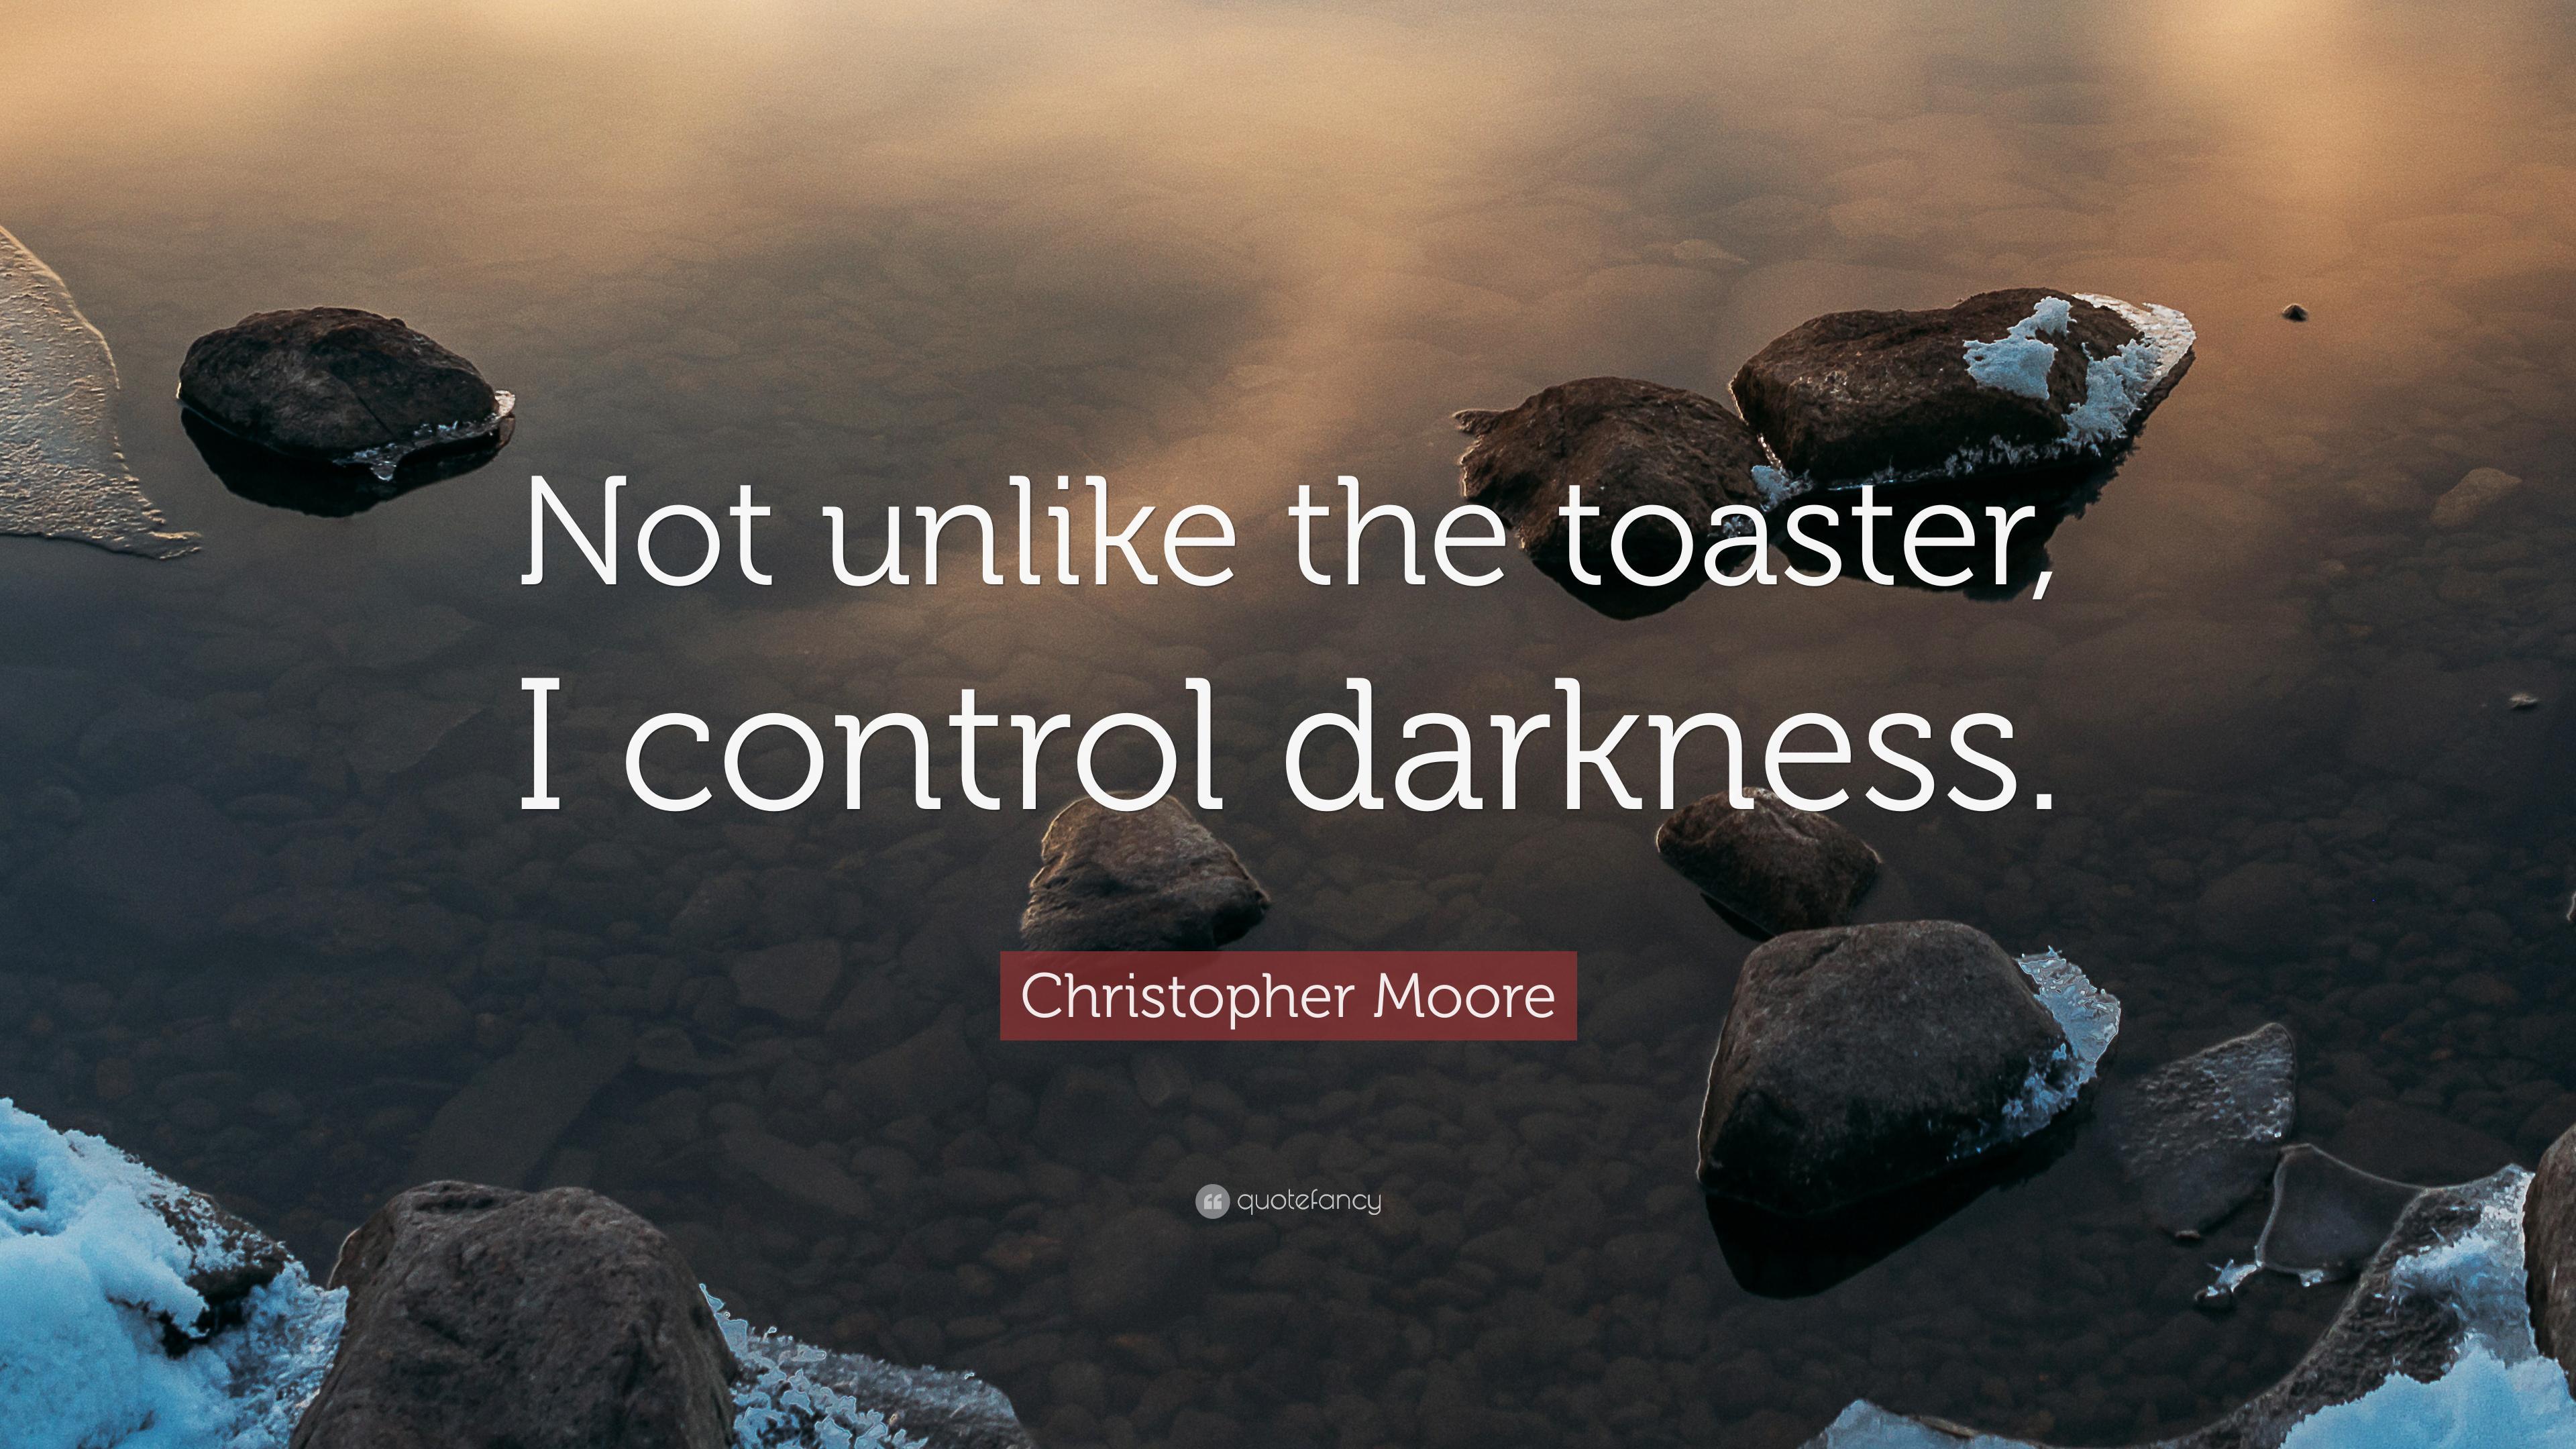 Christopher Moore Quote: “Not unlike the toaster, I control